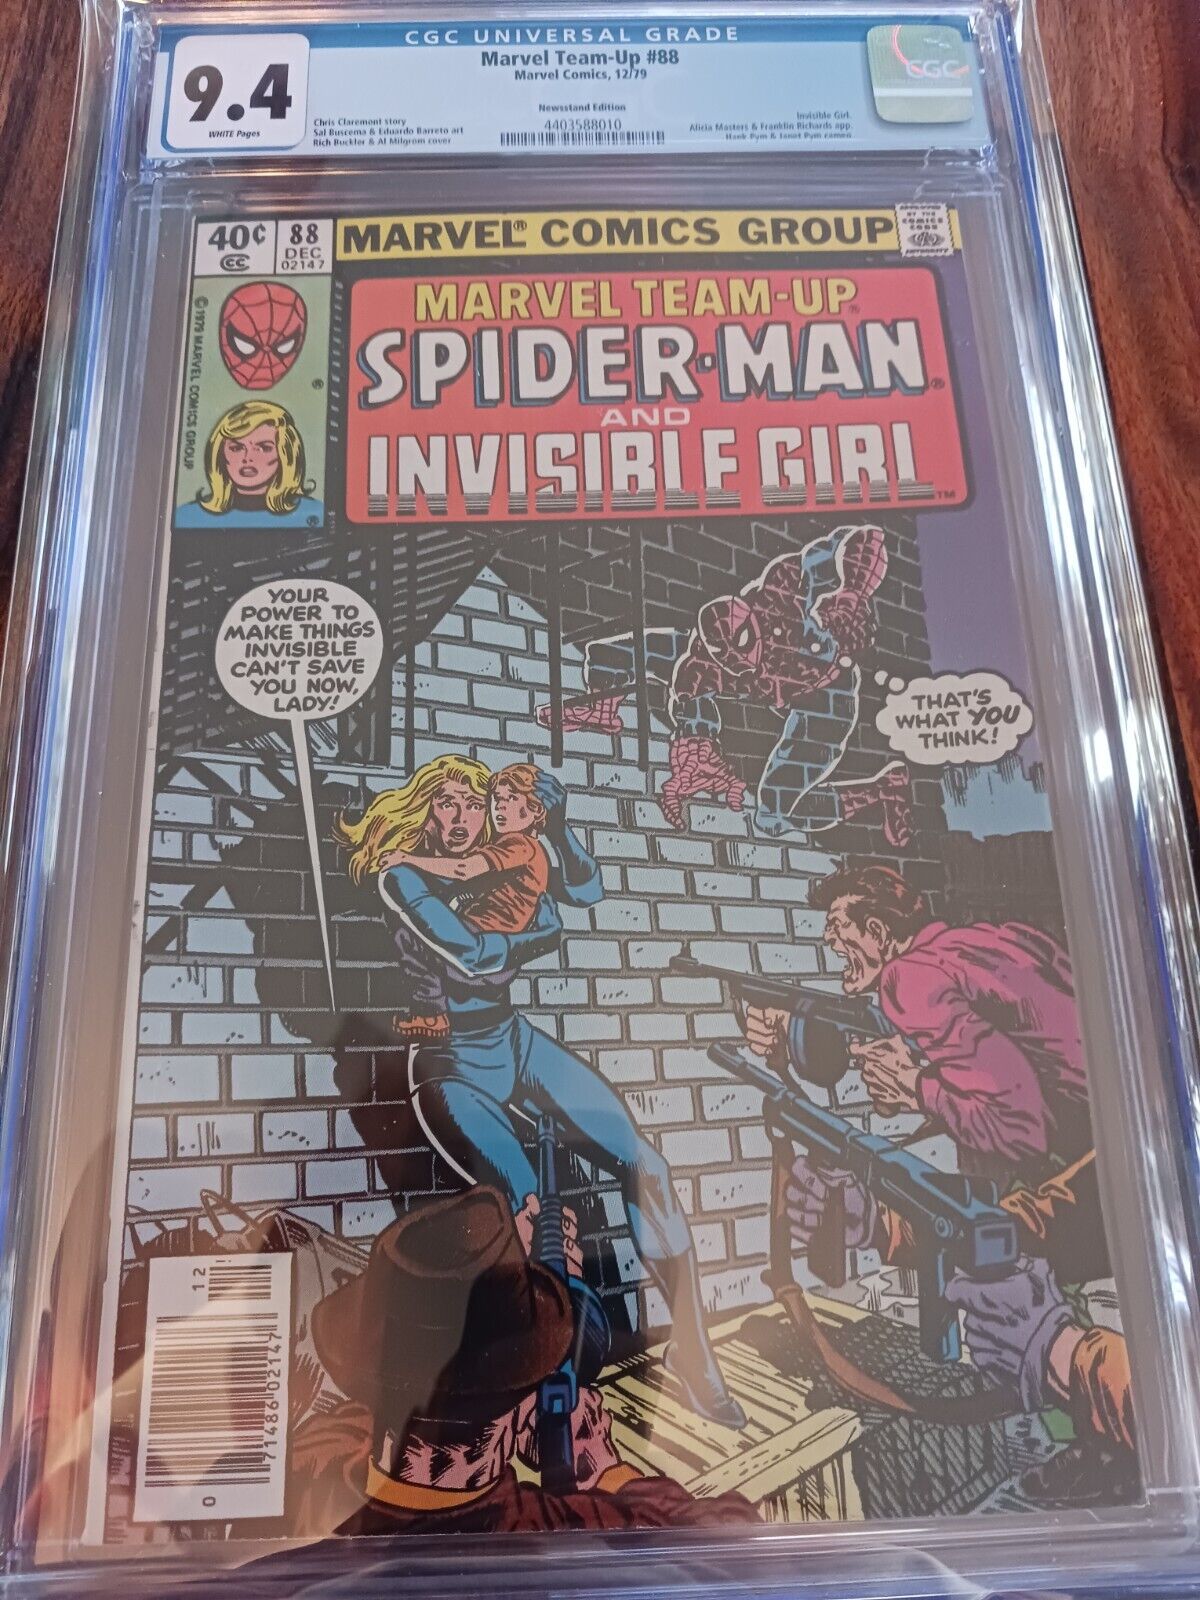 MARVEL TEAM UP #88 SPIDER-MAN + INVISIBLE GIRL CGC 9.4 *NEWSSTAND* WHITE PAGES